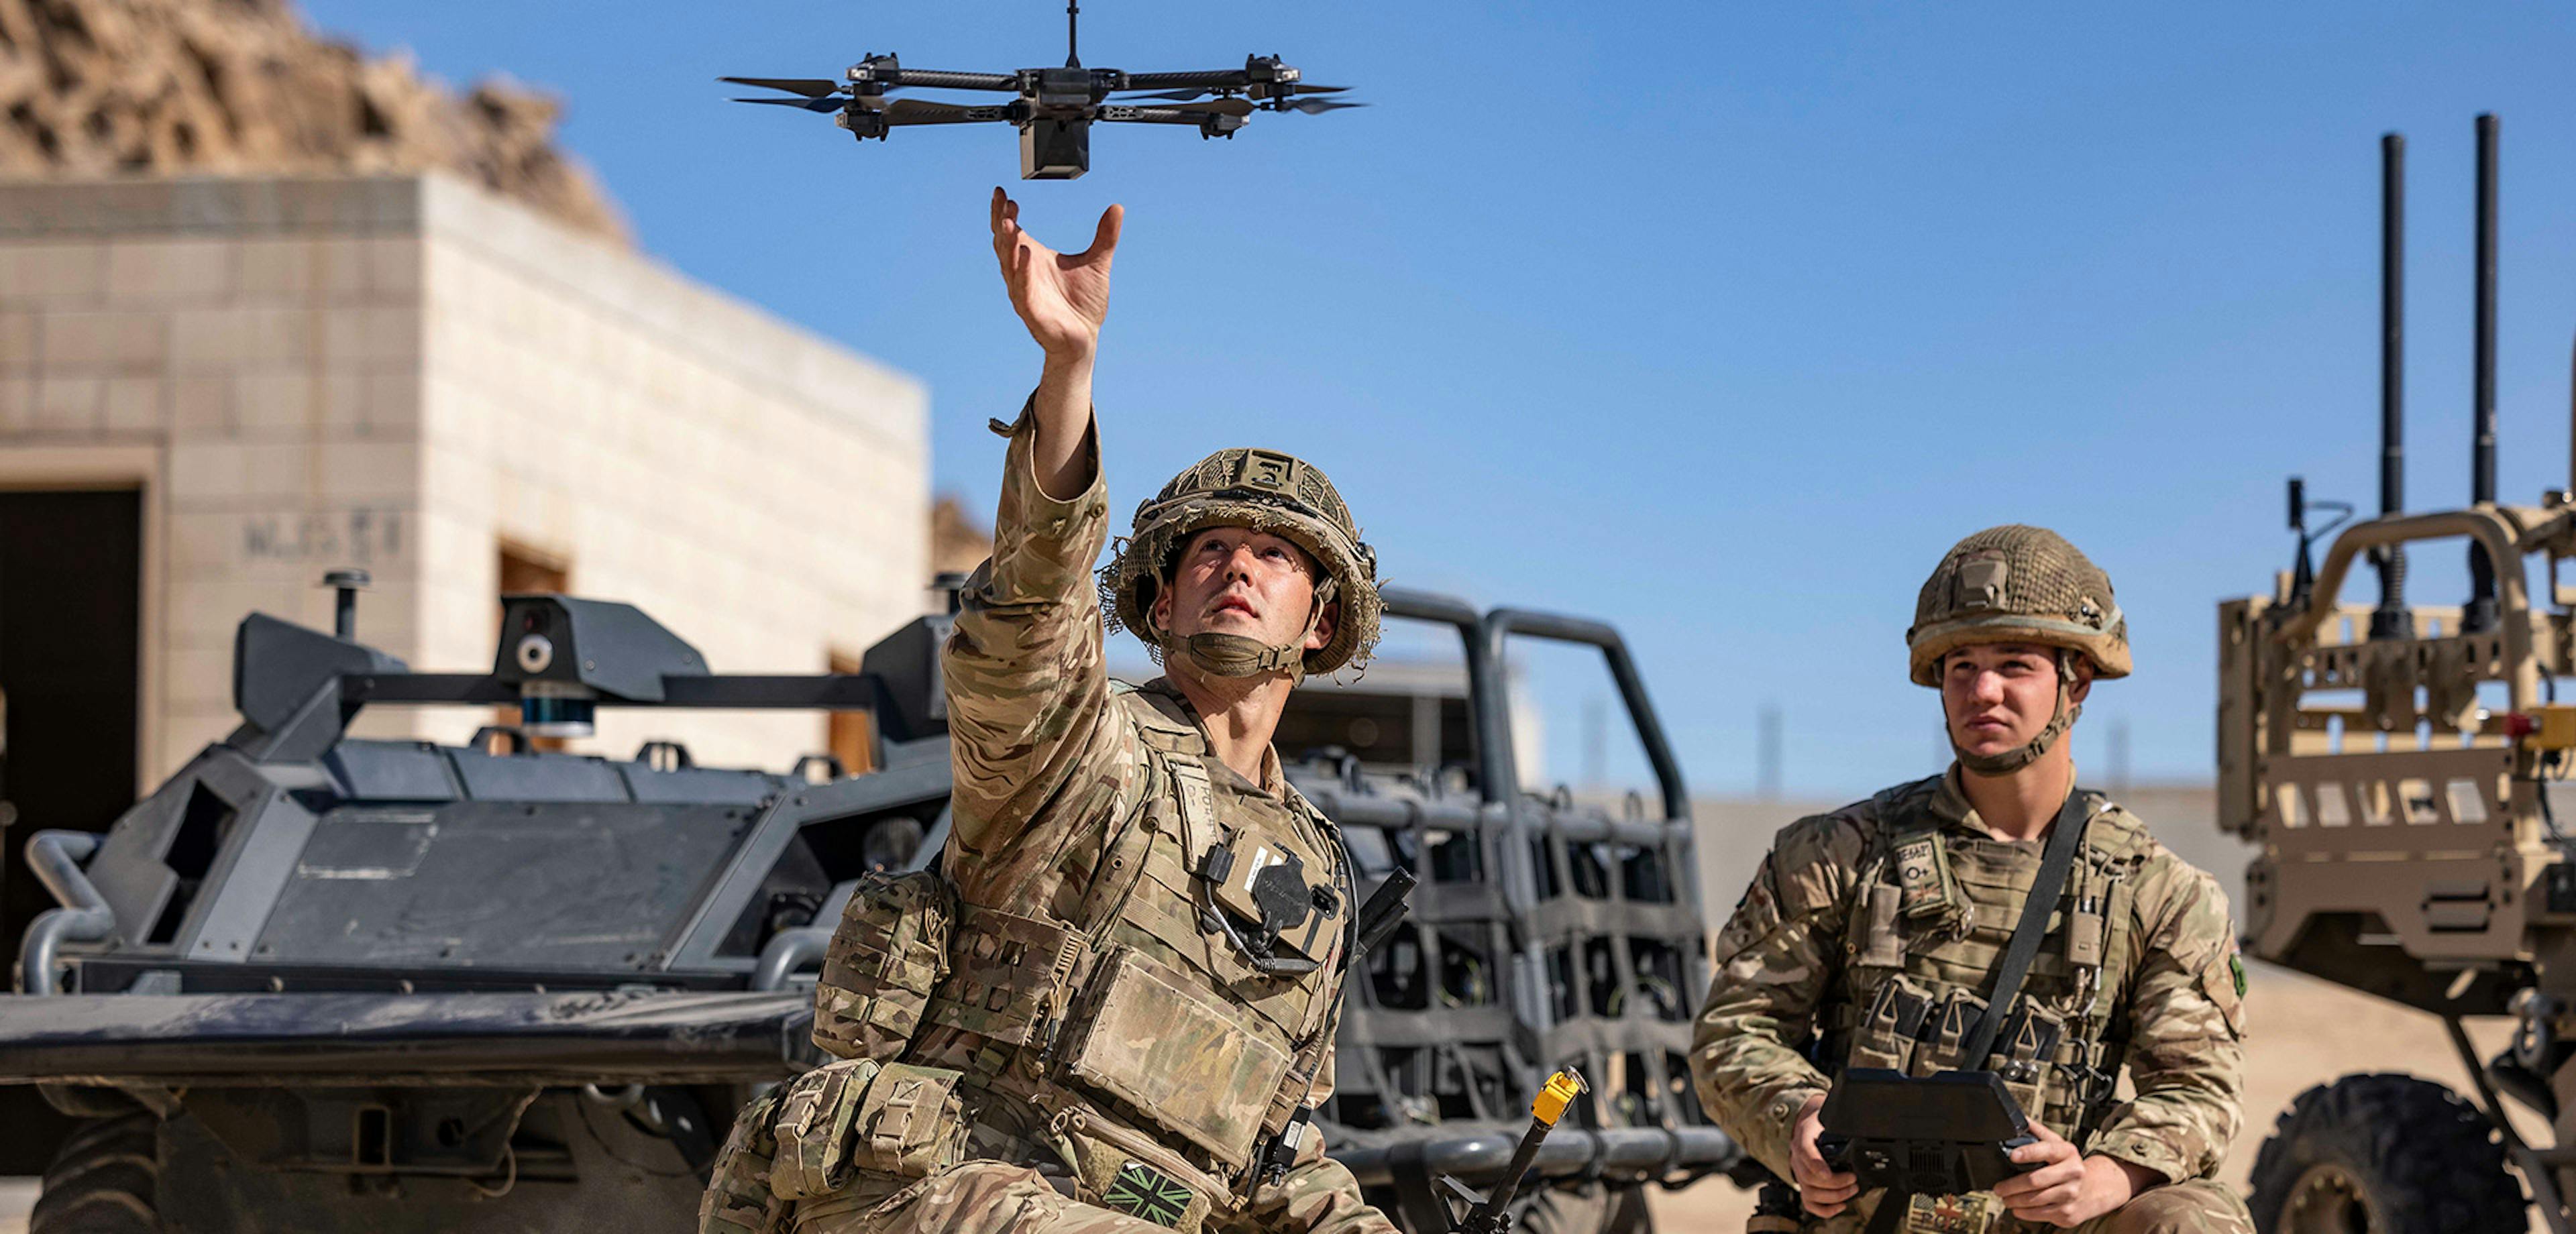 Two military men launching a small communications drone.